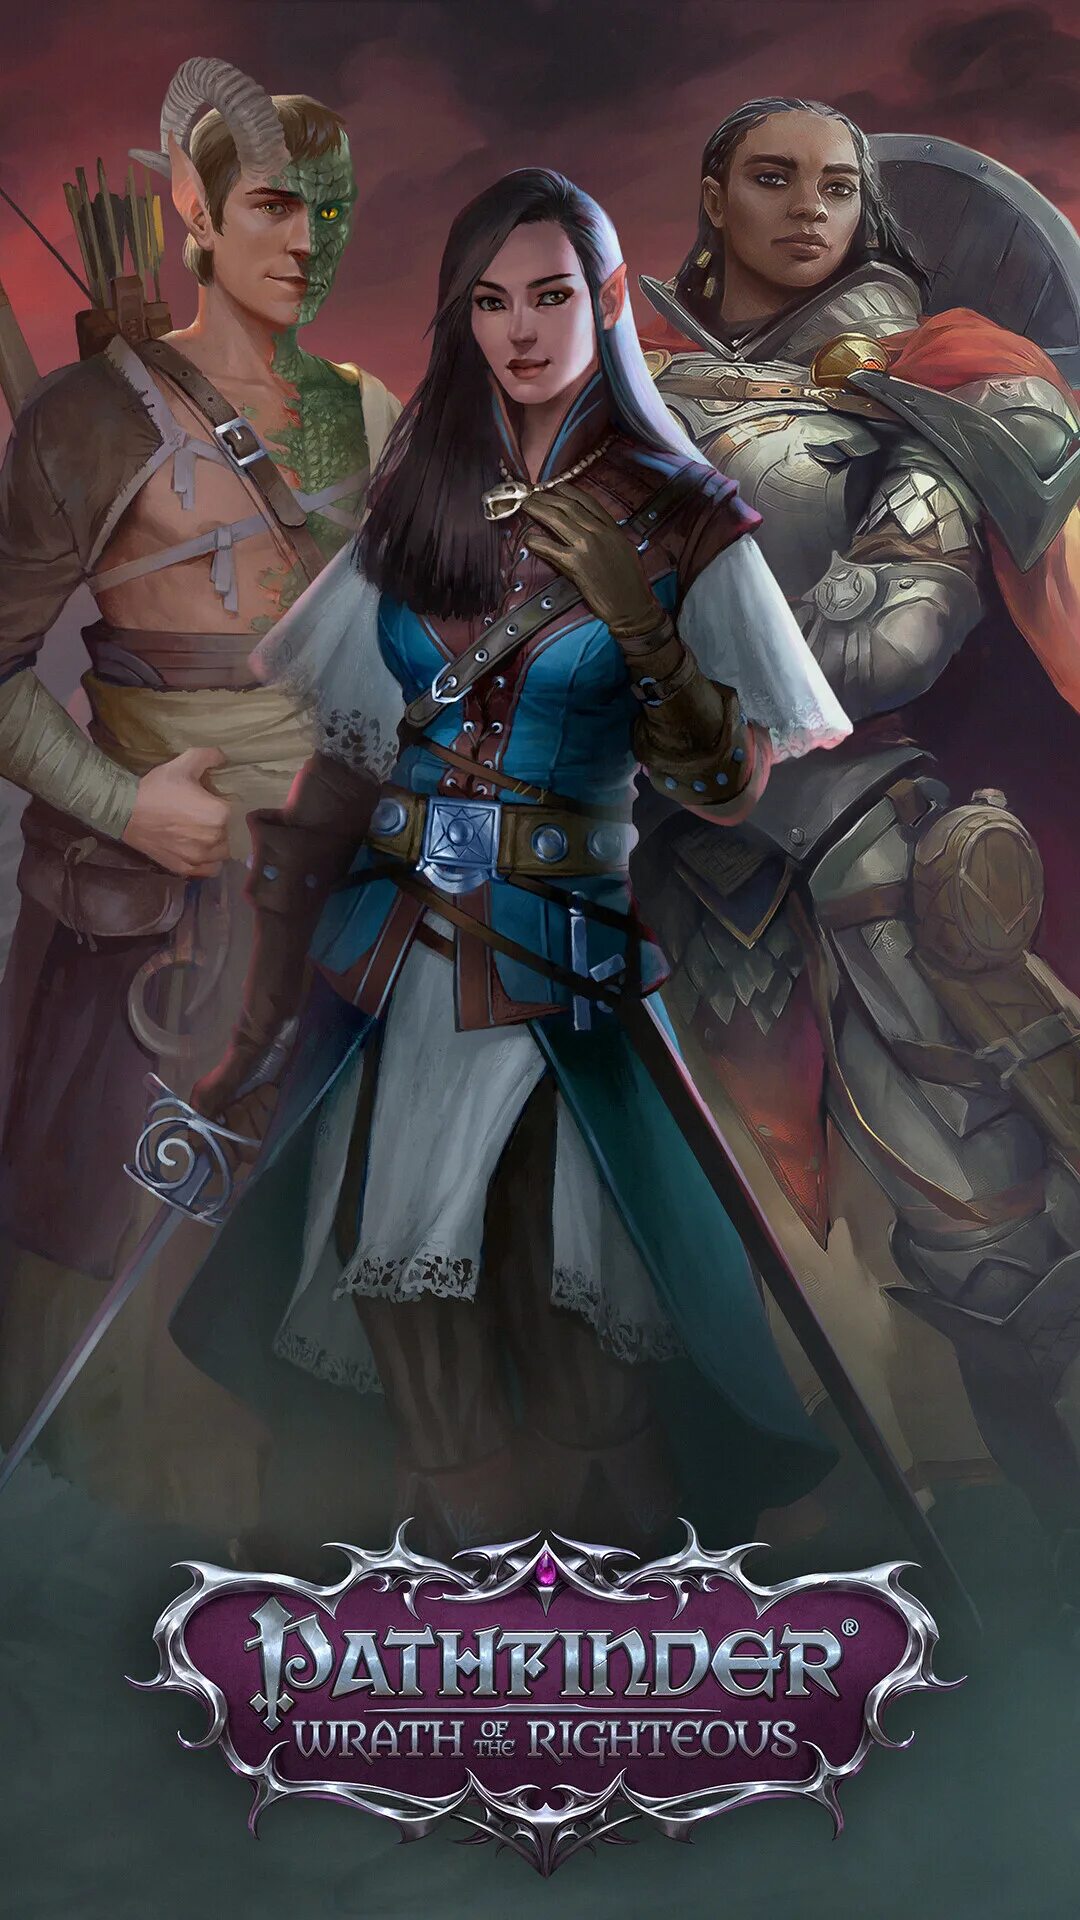 Pathfinder Wrath of the Righteous Камелия. Pathfinder Wrath of the Righteous Камелия арт. Патфайндер Wrath of the Righteous. Pathfinder Wrath of the Righteous портреты Эльф. Камелия pathfinder wrath